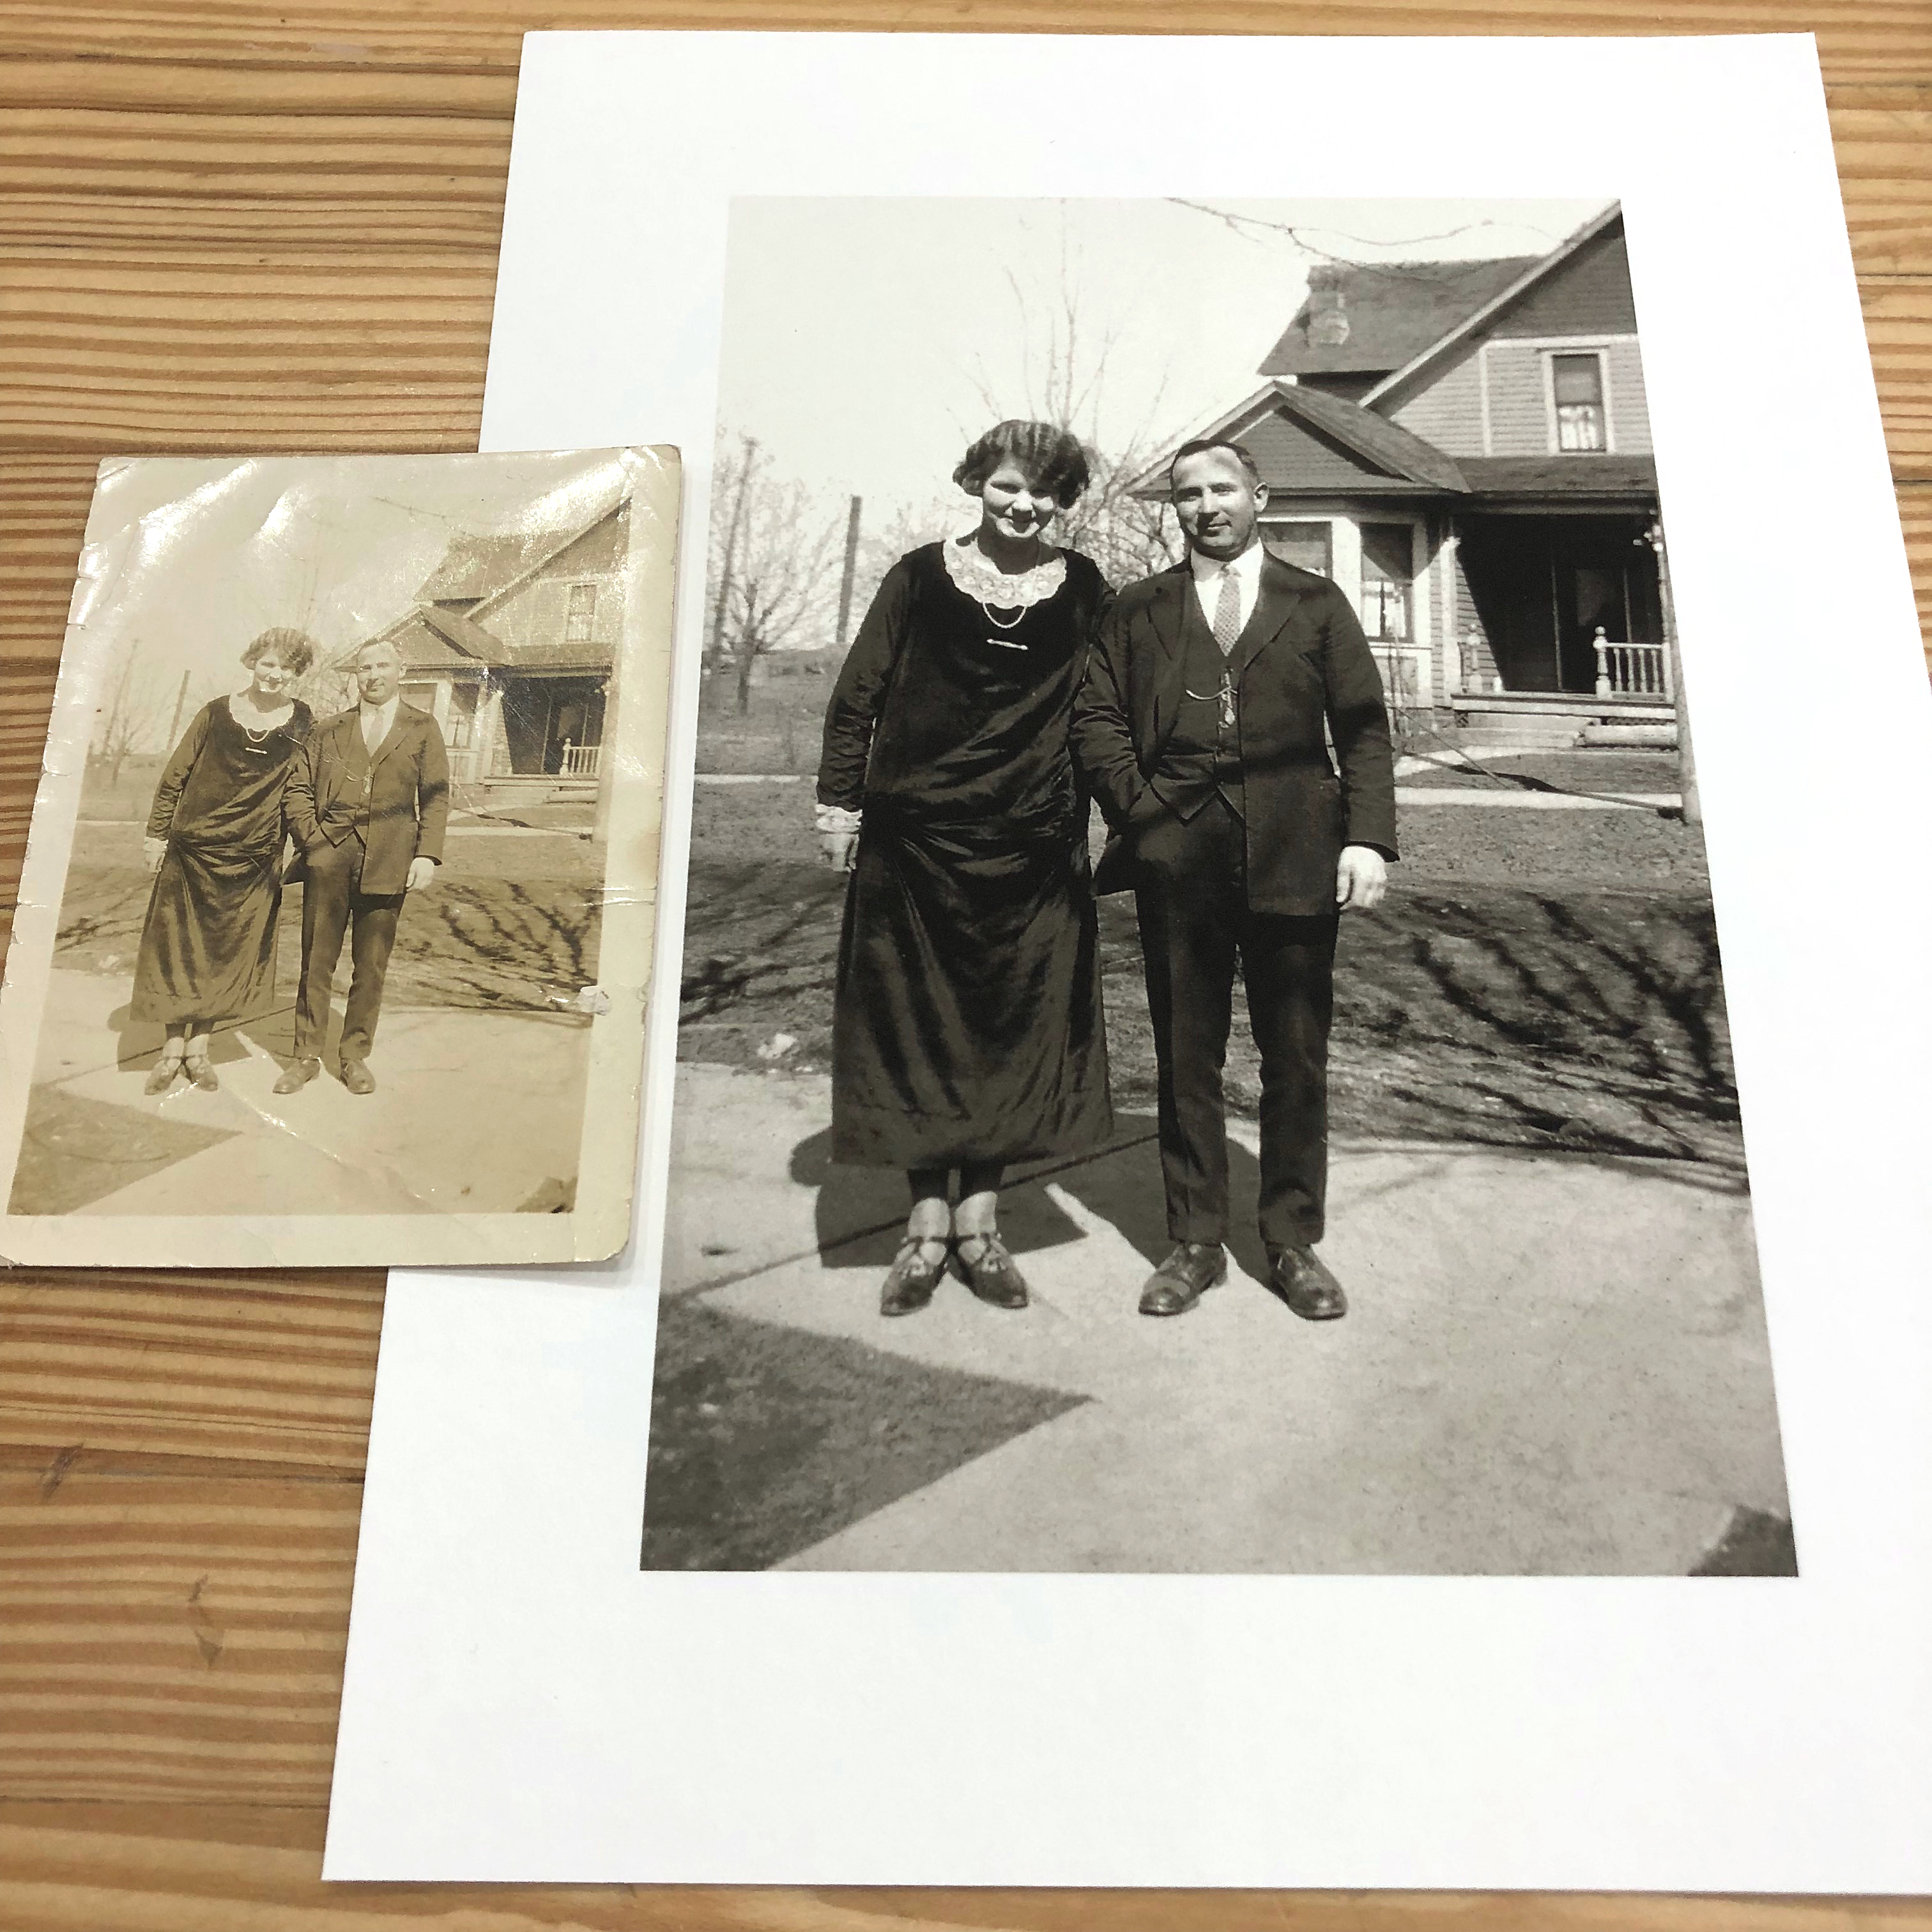 Faded photograph restored and enlarged at our Virginia studio